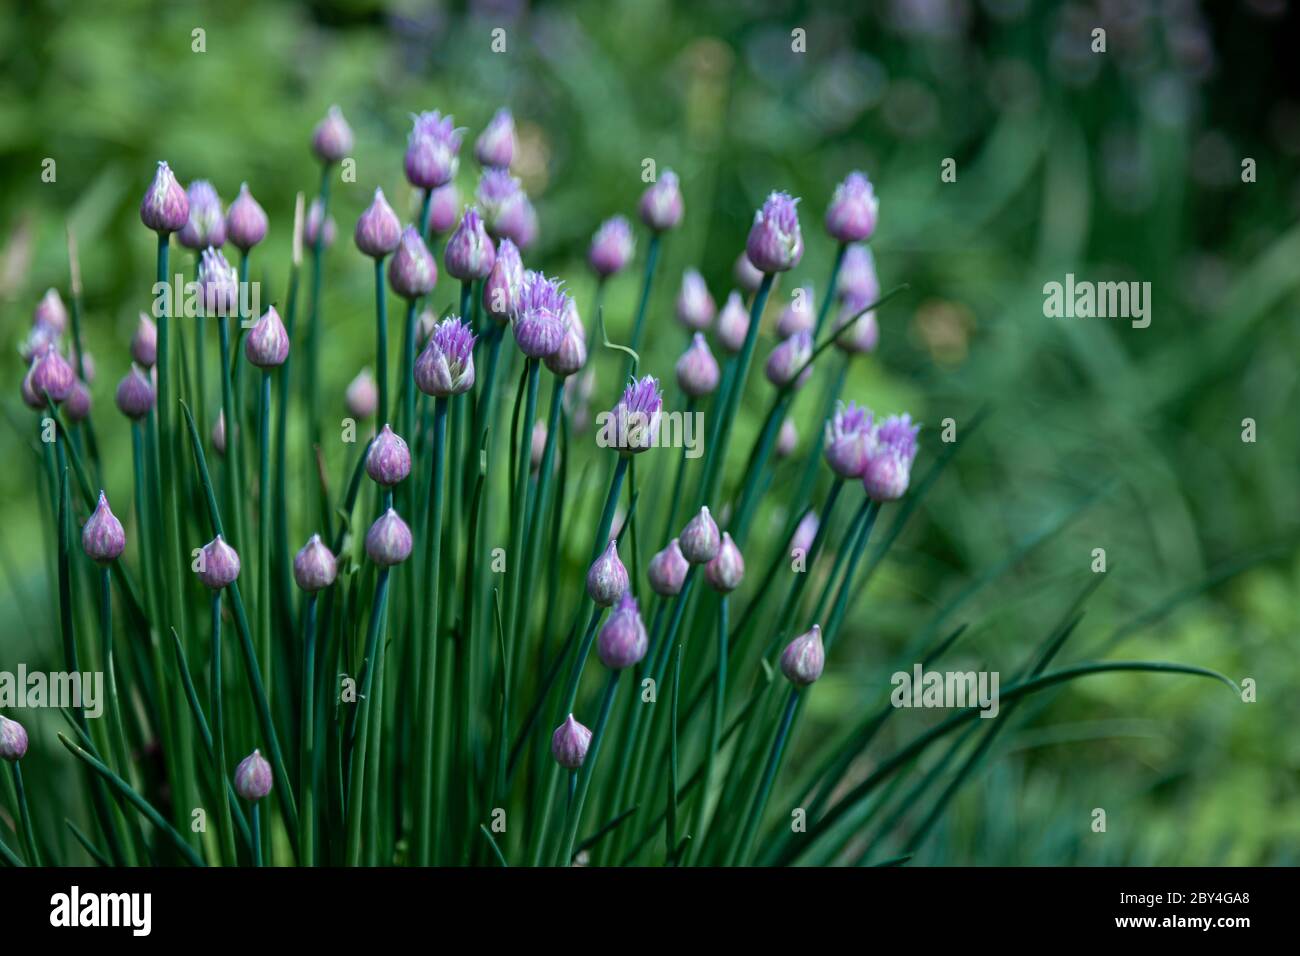 Purple flowers in the garden. Onion, or chives, is a perennial herbaceous plant Latin name: Allium schoenoprasum. Stock Photo